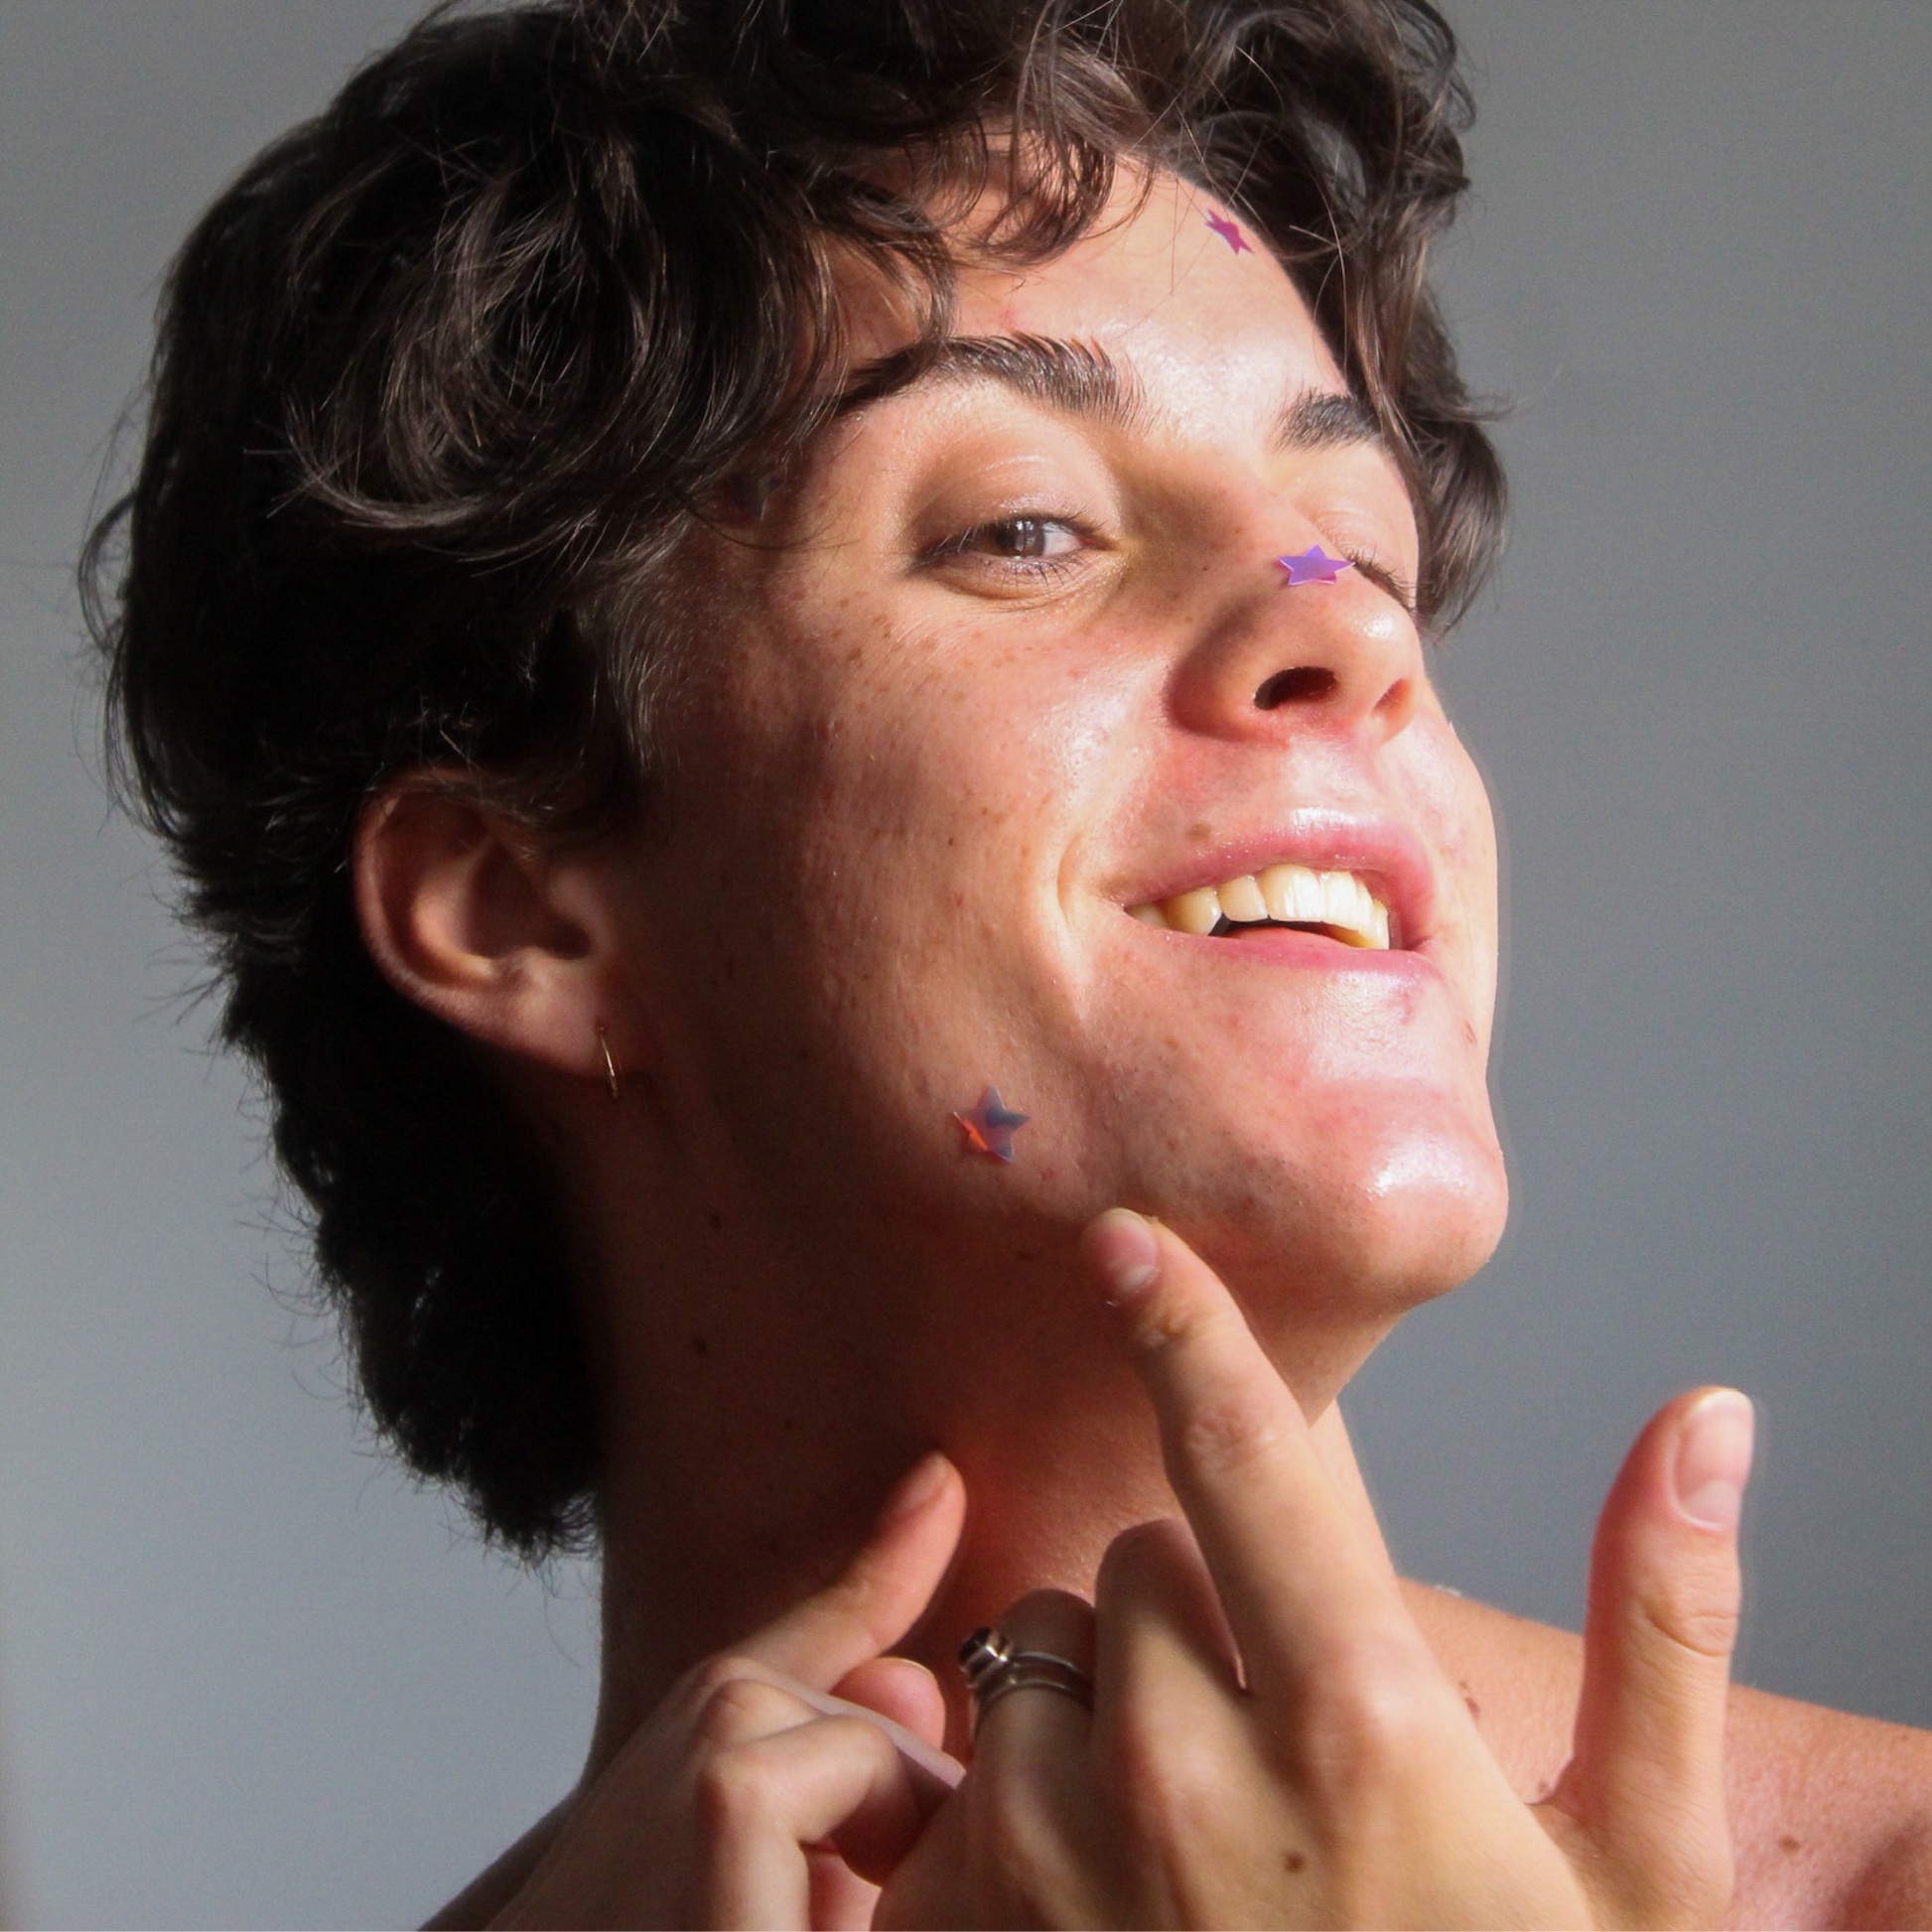 Boy wearing the holographic star shaped pimple patch and also holding a sheet of star pimple patches